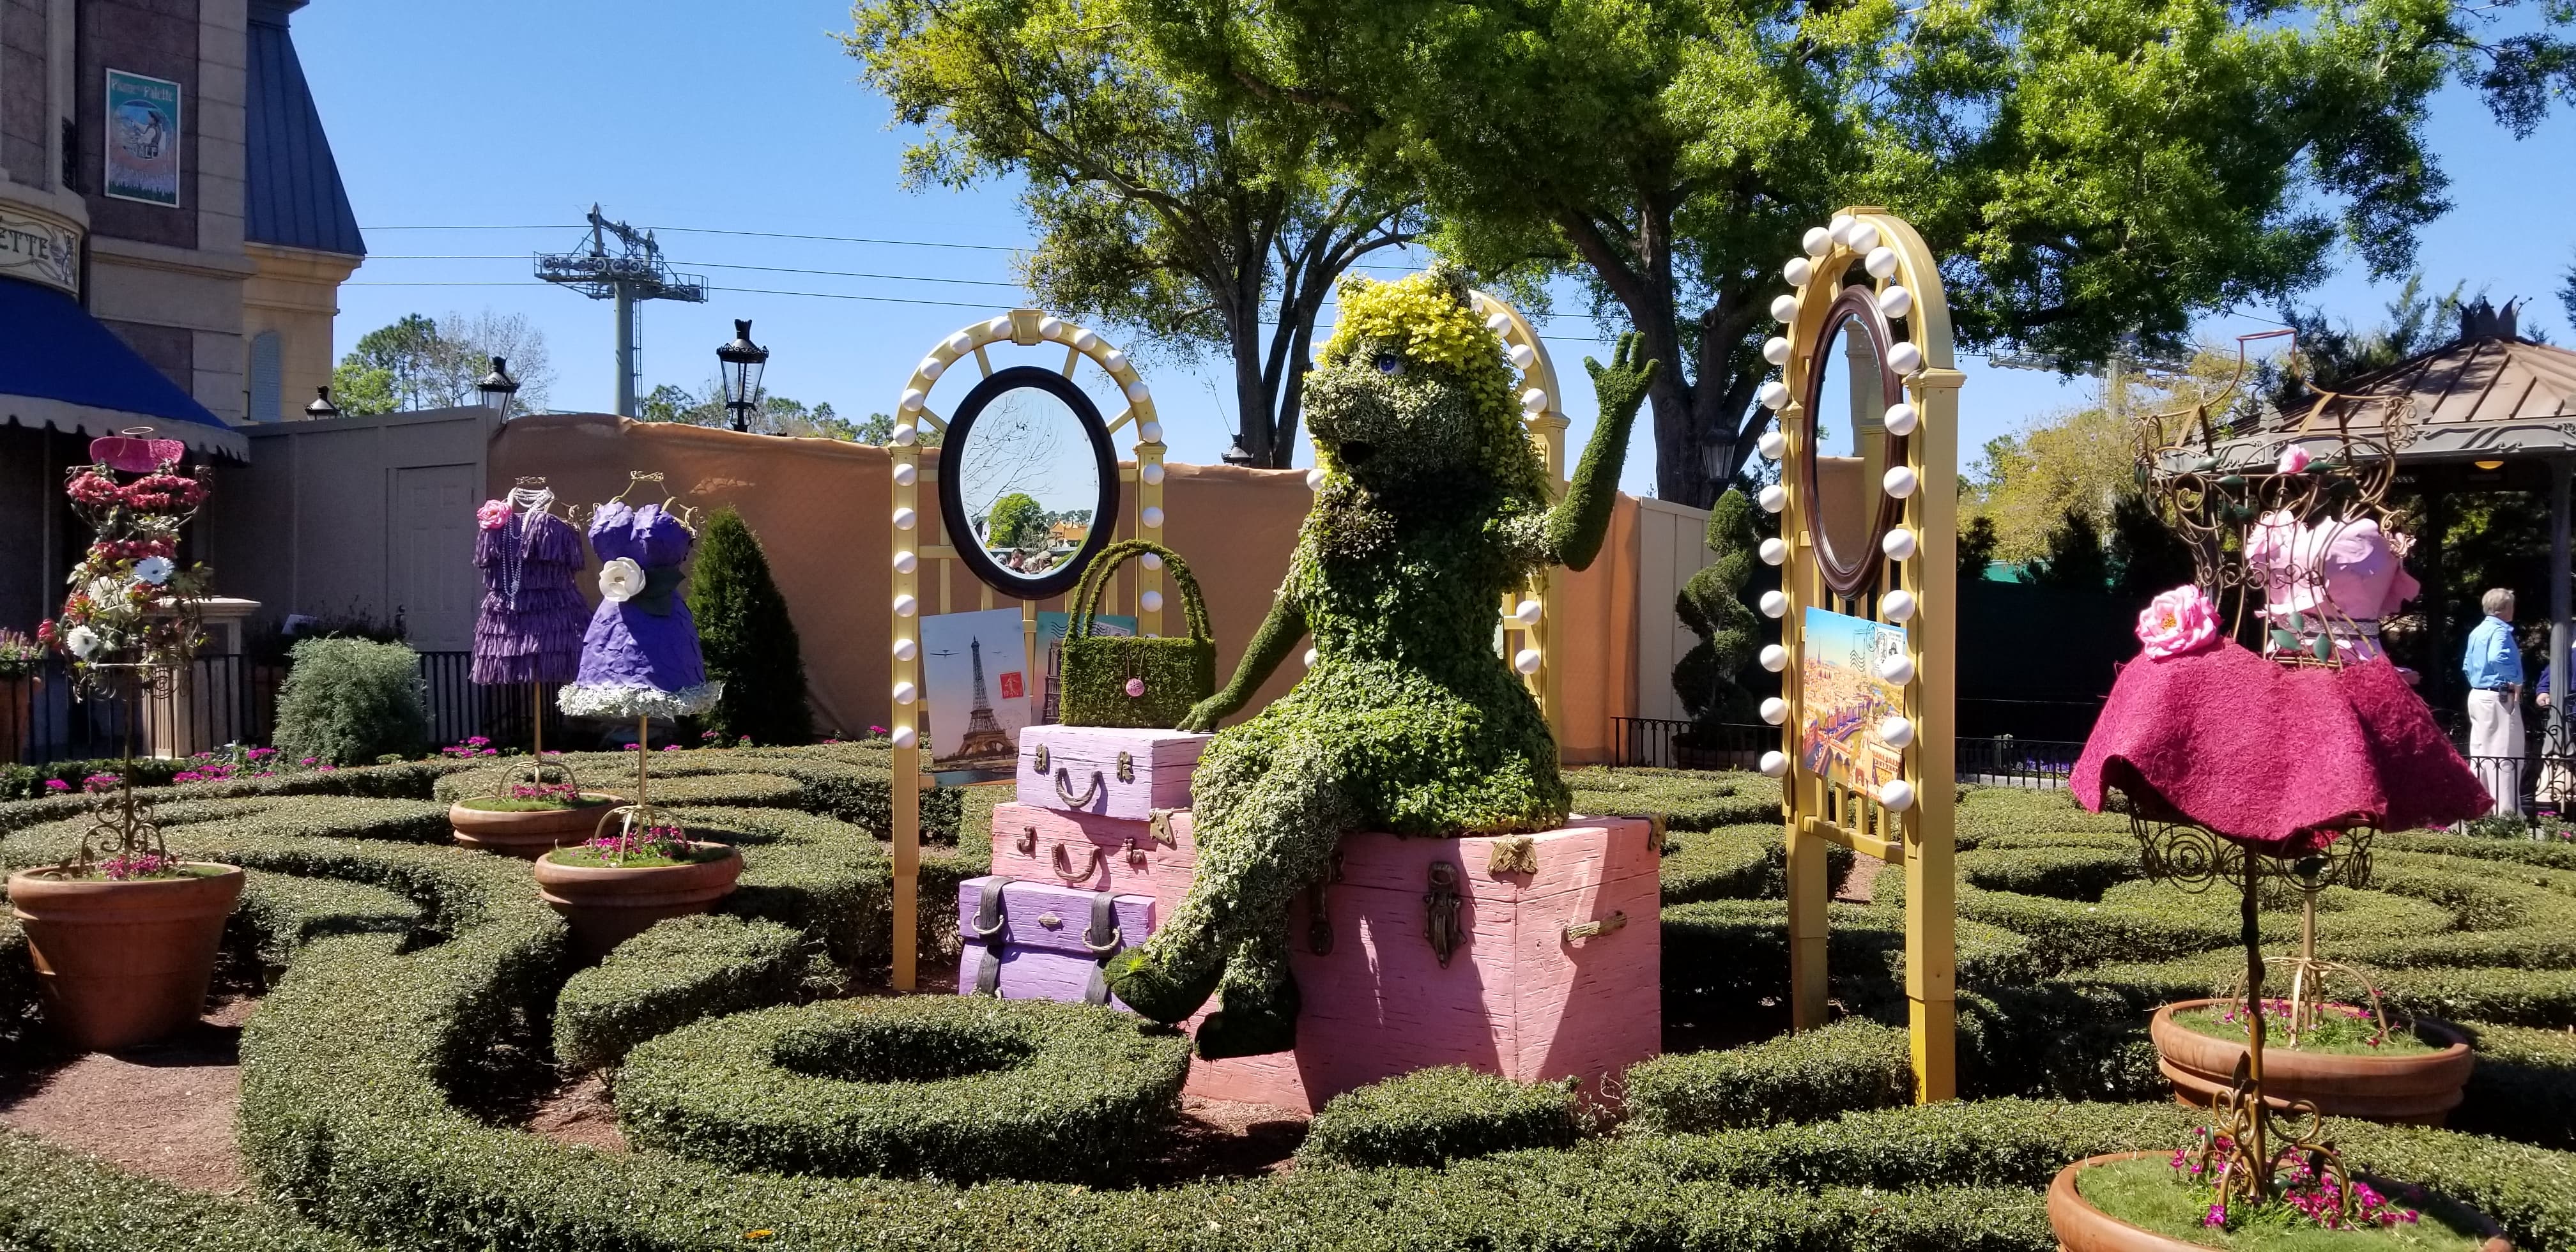 A Look at The Topiaries of Epcot’s Flower & Garden Festival 2019